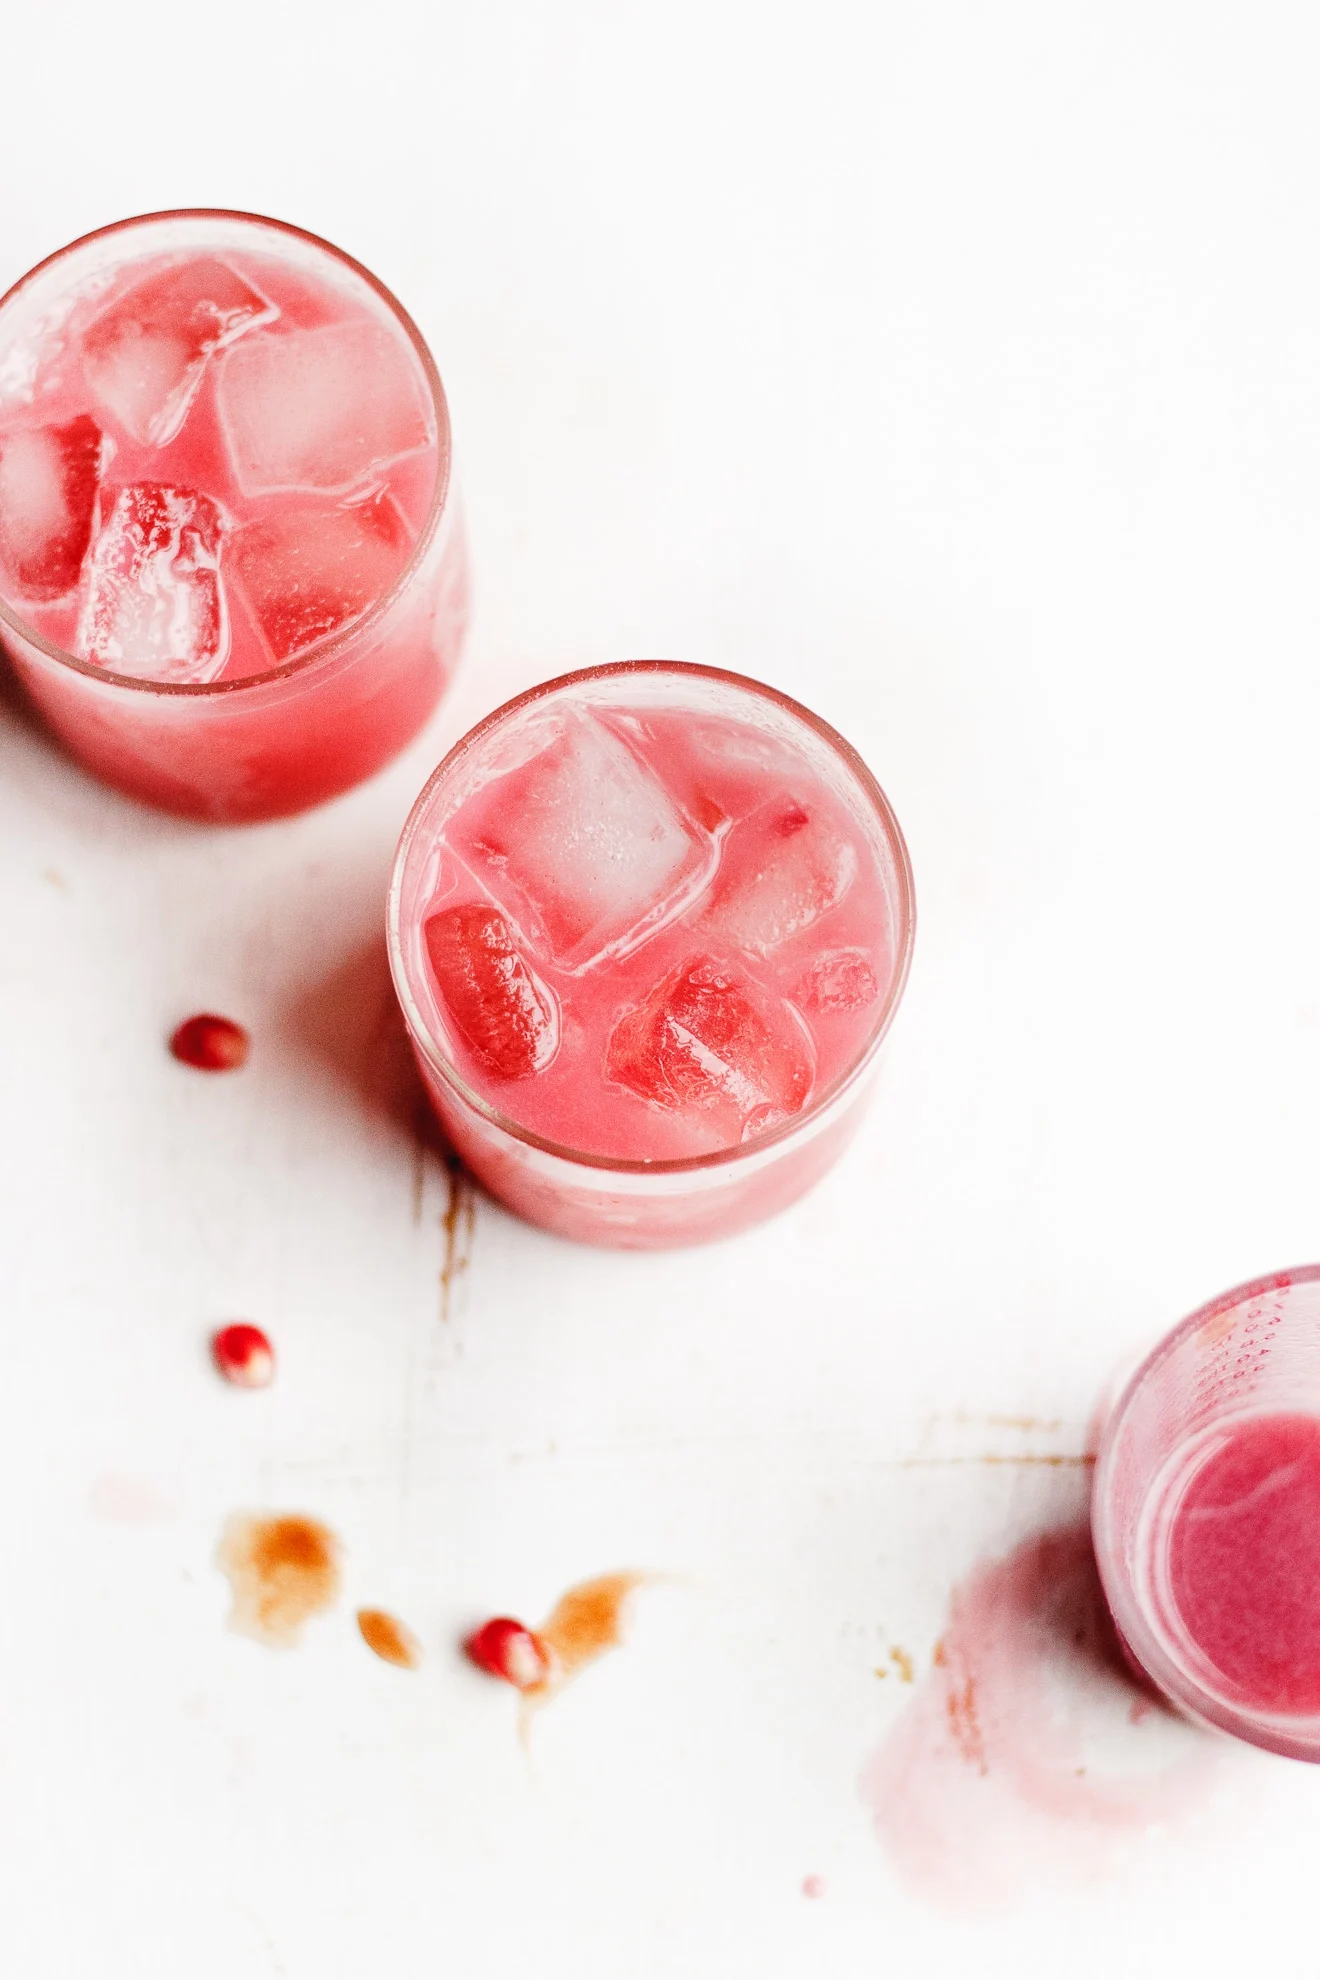 Date Syrup + Pomegranate Tequila Coolers | How to make date syrup. A simple easy recipe for sweetening foods naturally with dates. A vegan, refined sugar-free syrup. 